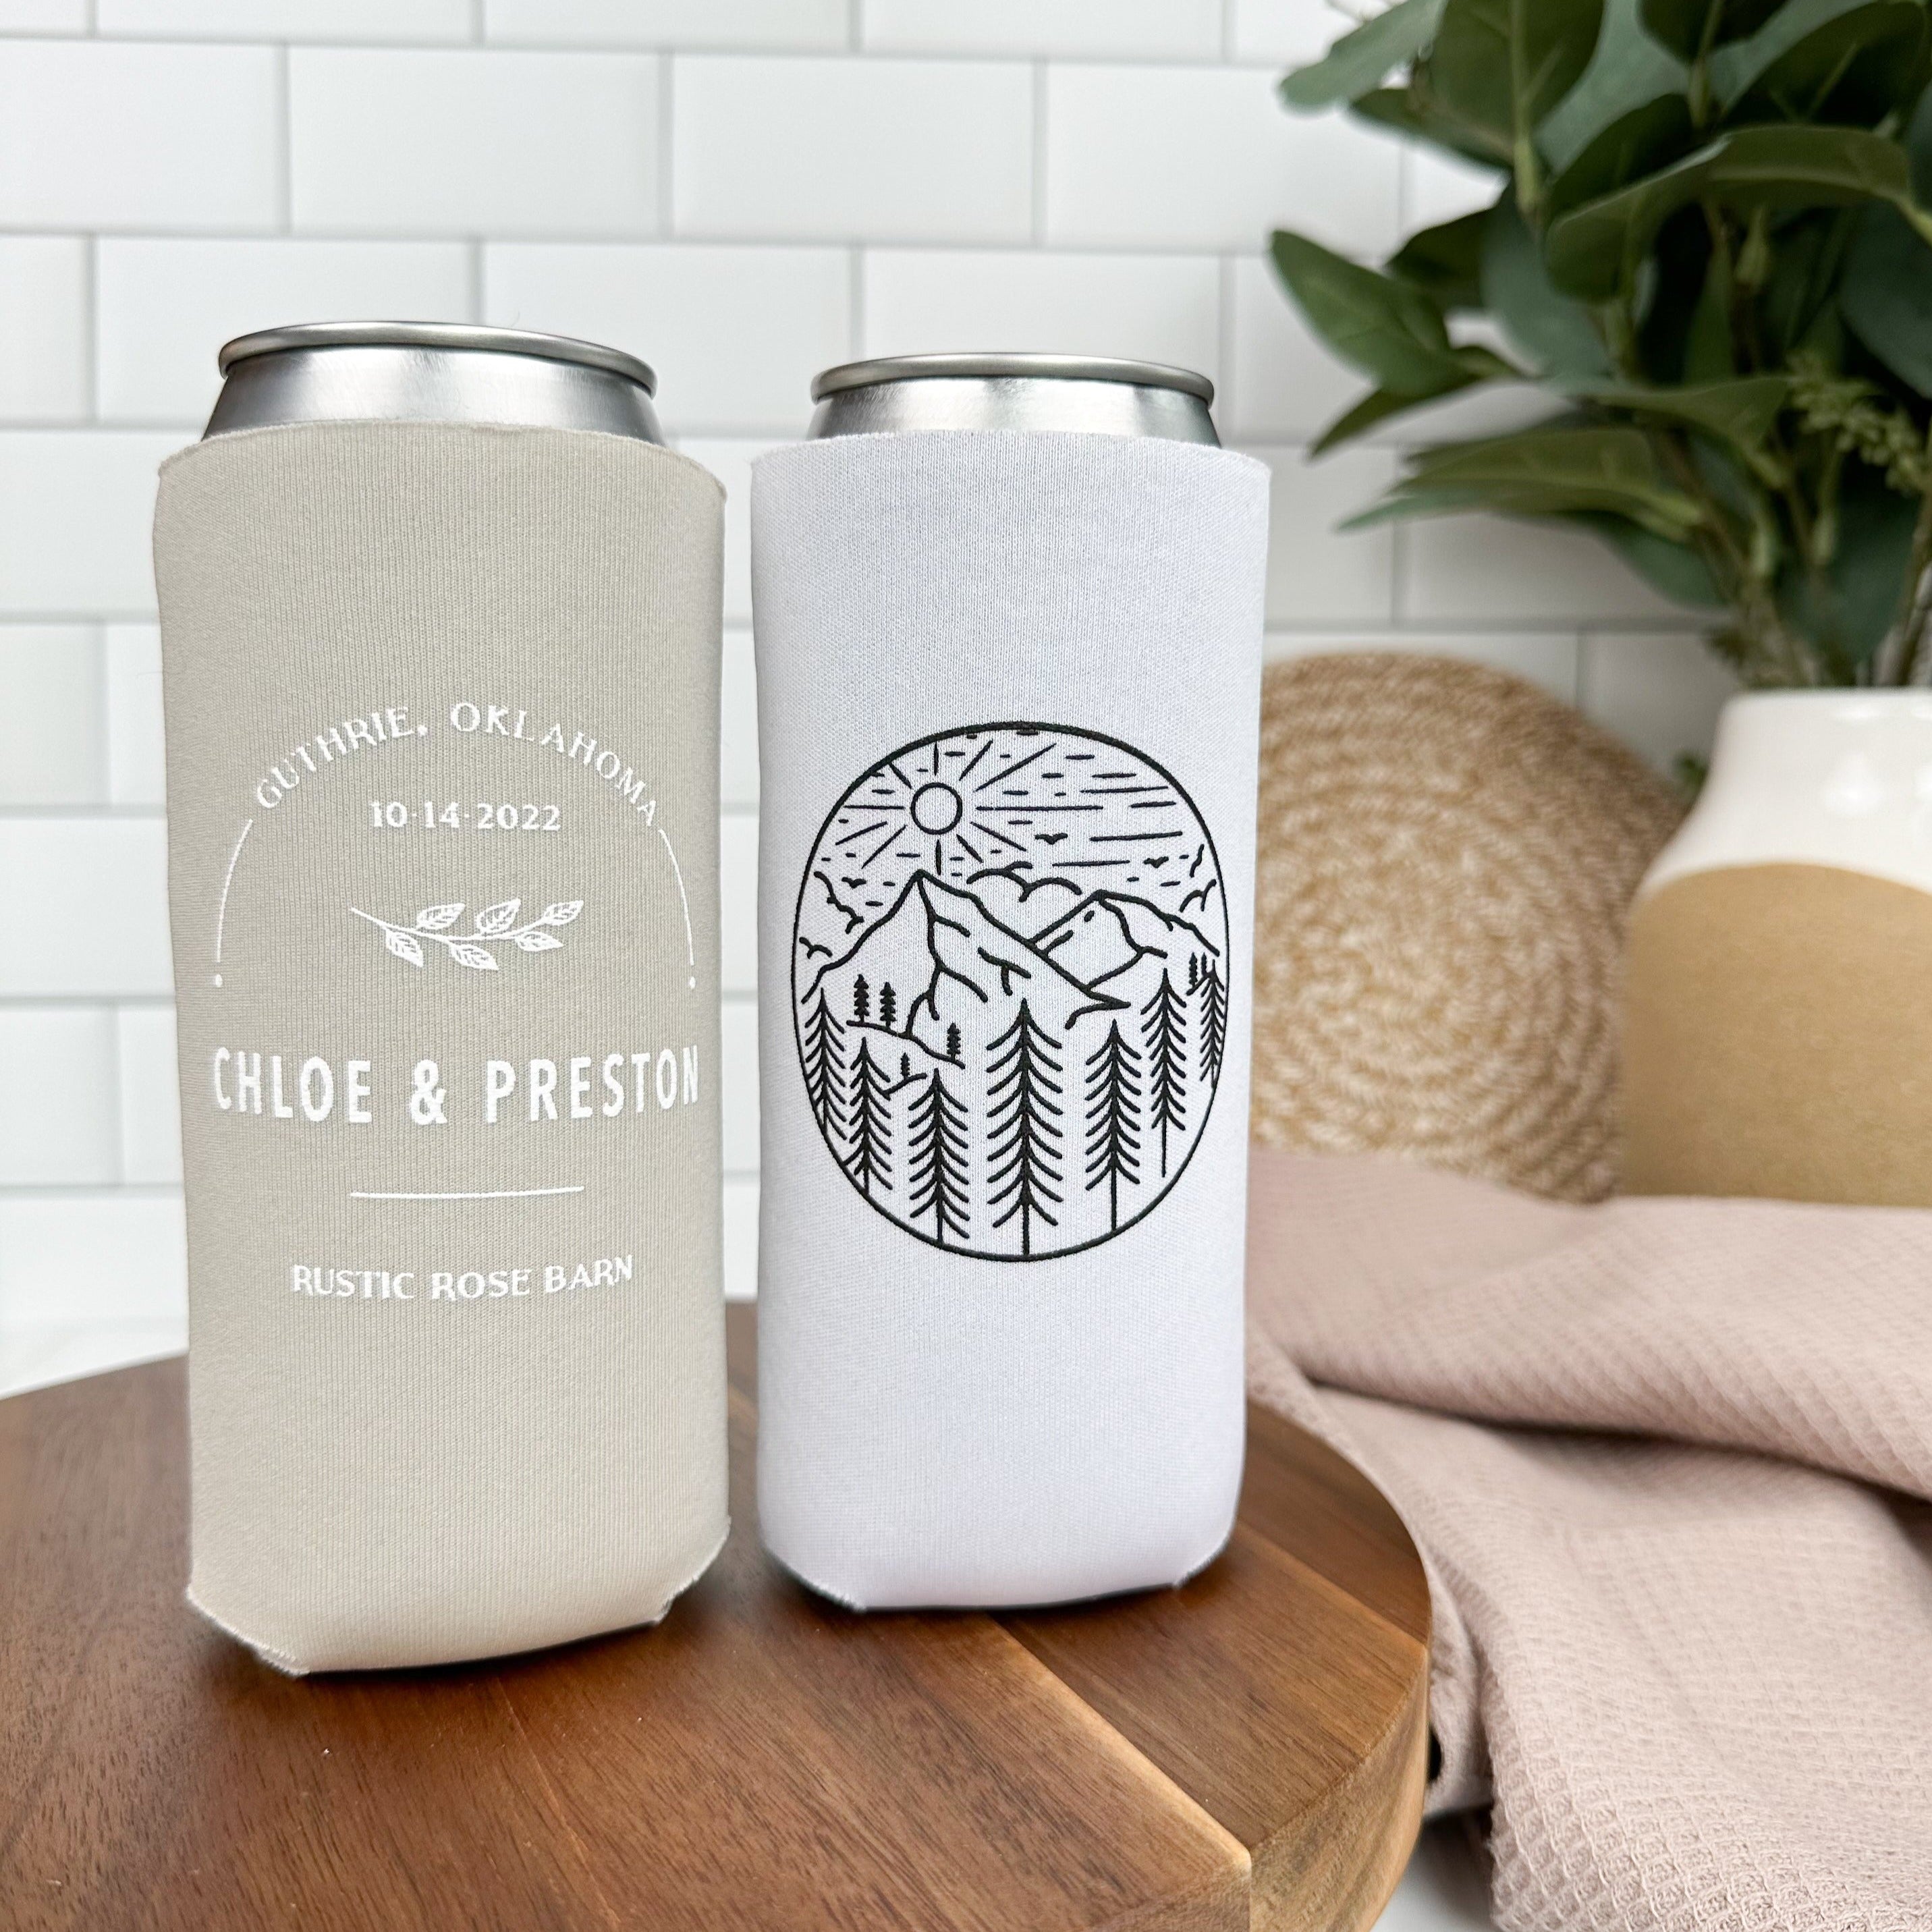 Custom mountain destination wedding slim can coolers in the colors sandstone and white